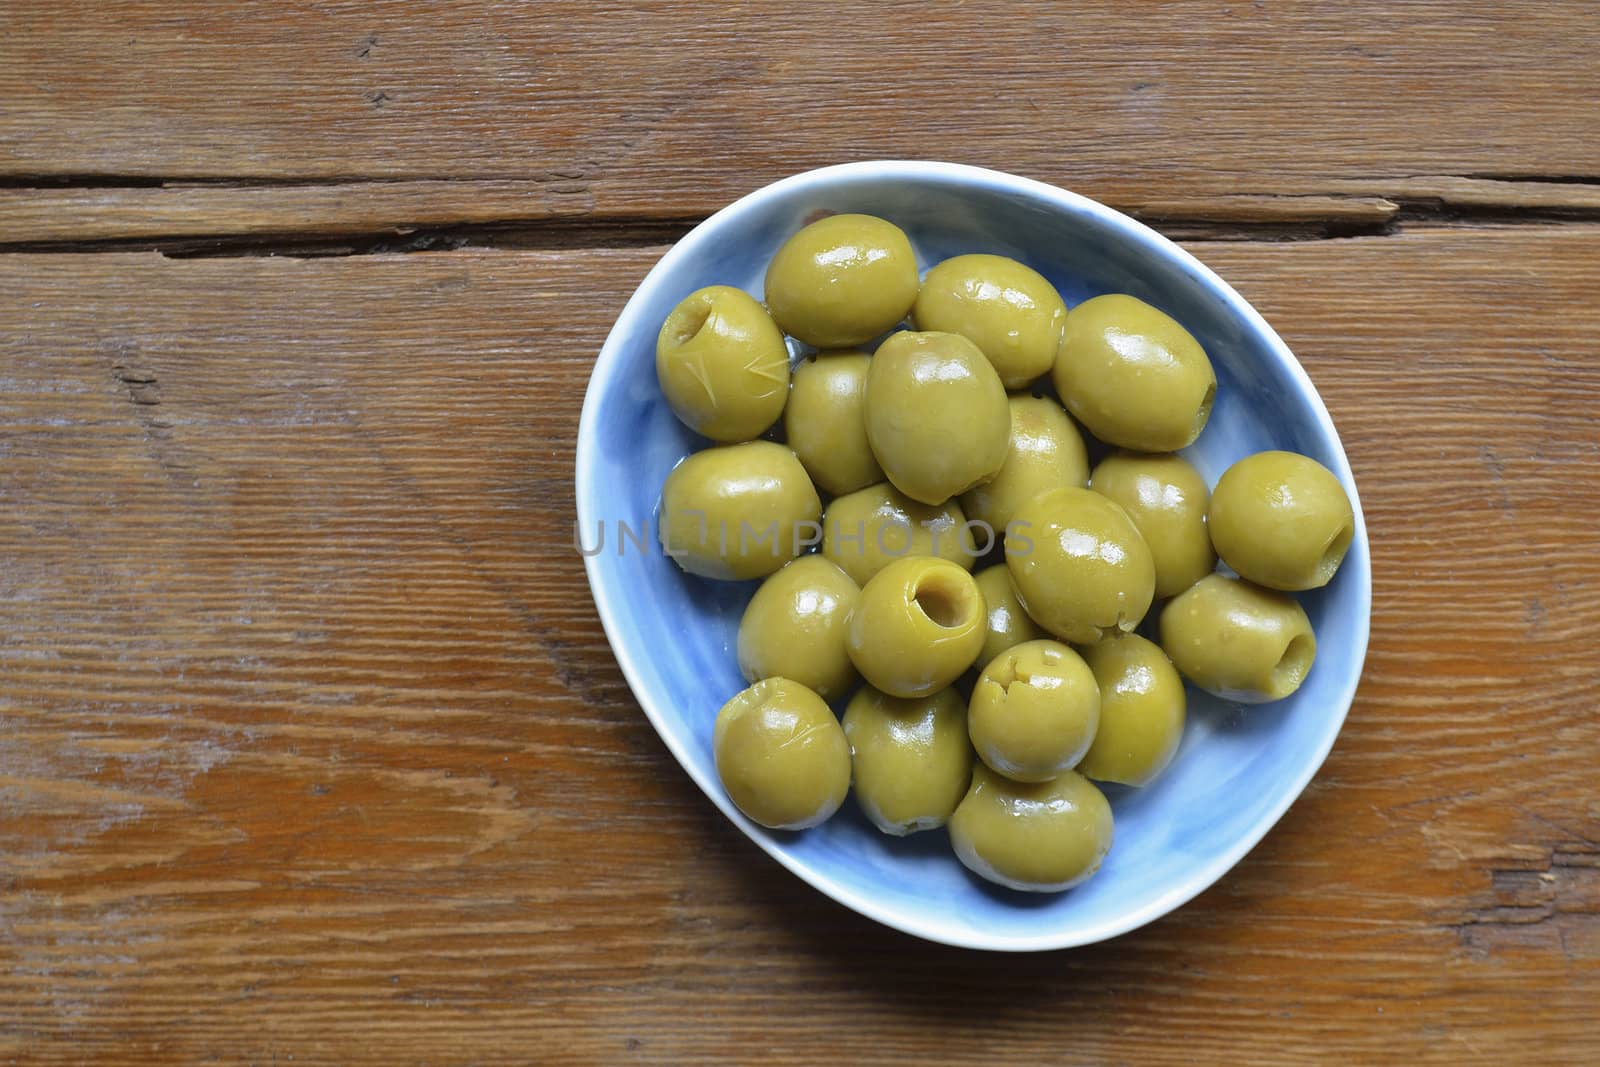 pitted green olives on blue plate over weathered wooden table; focus on olives